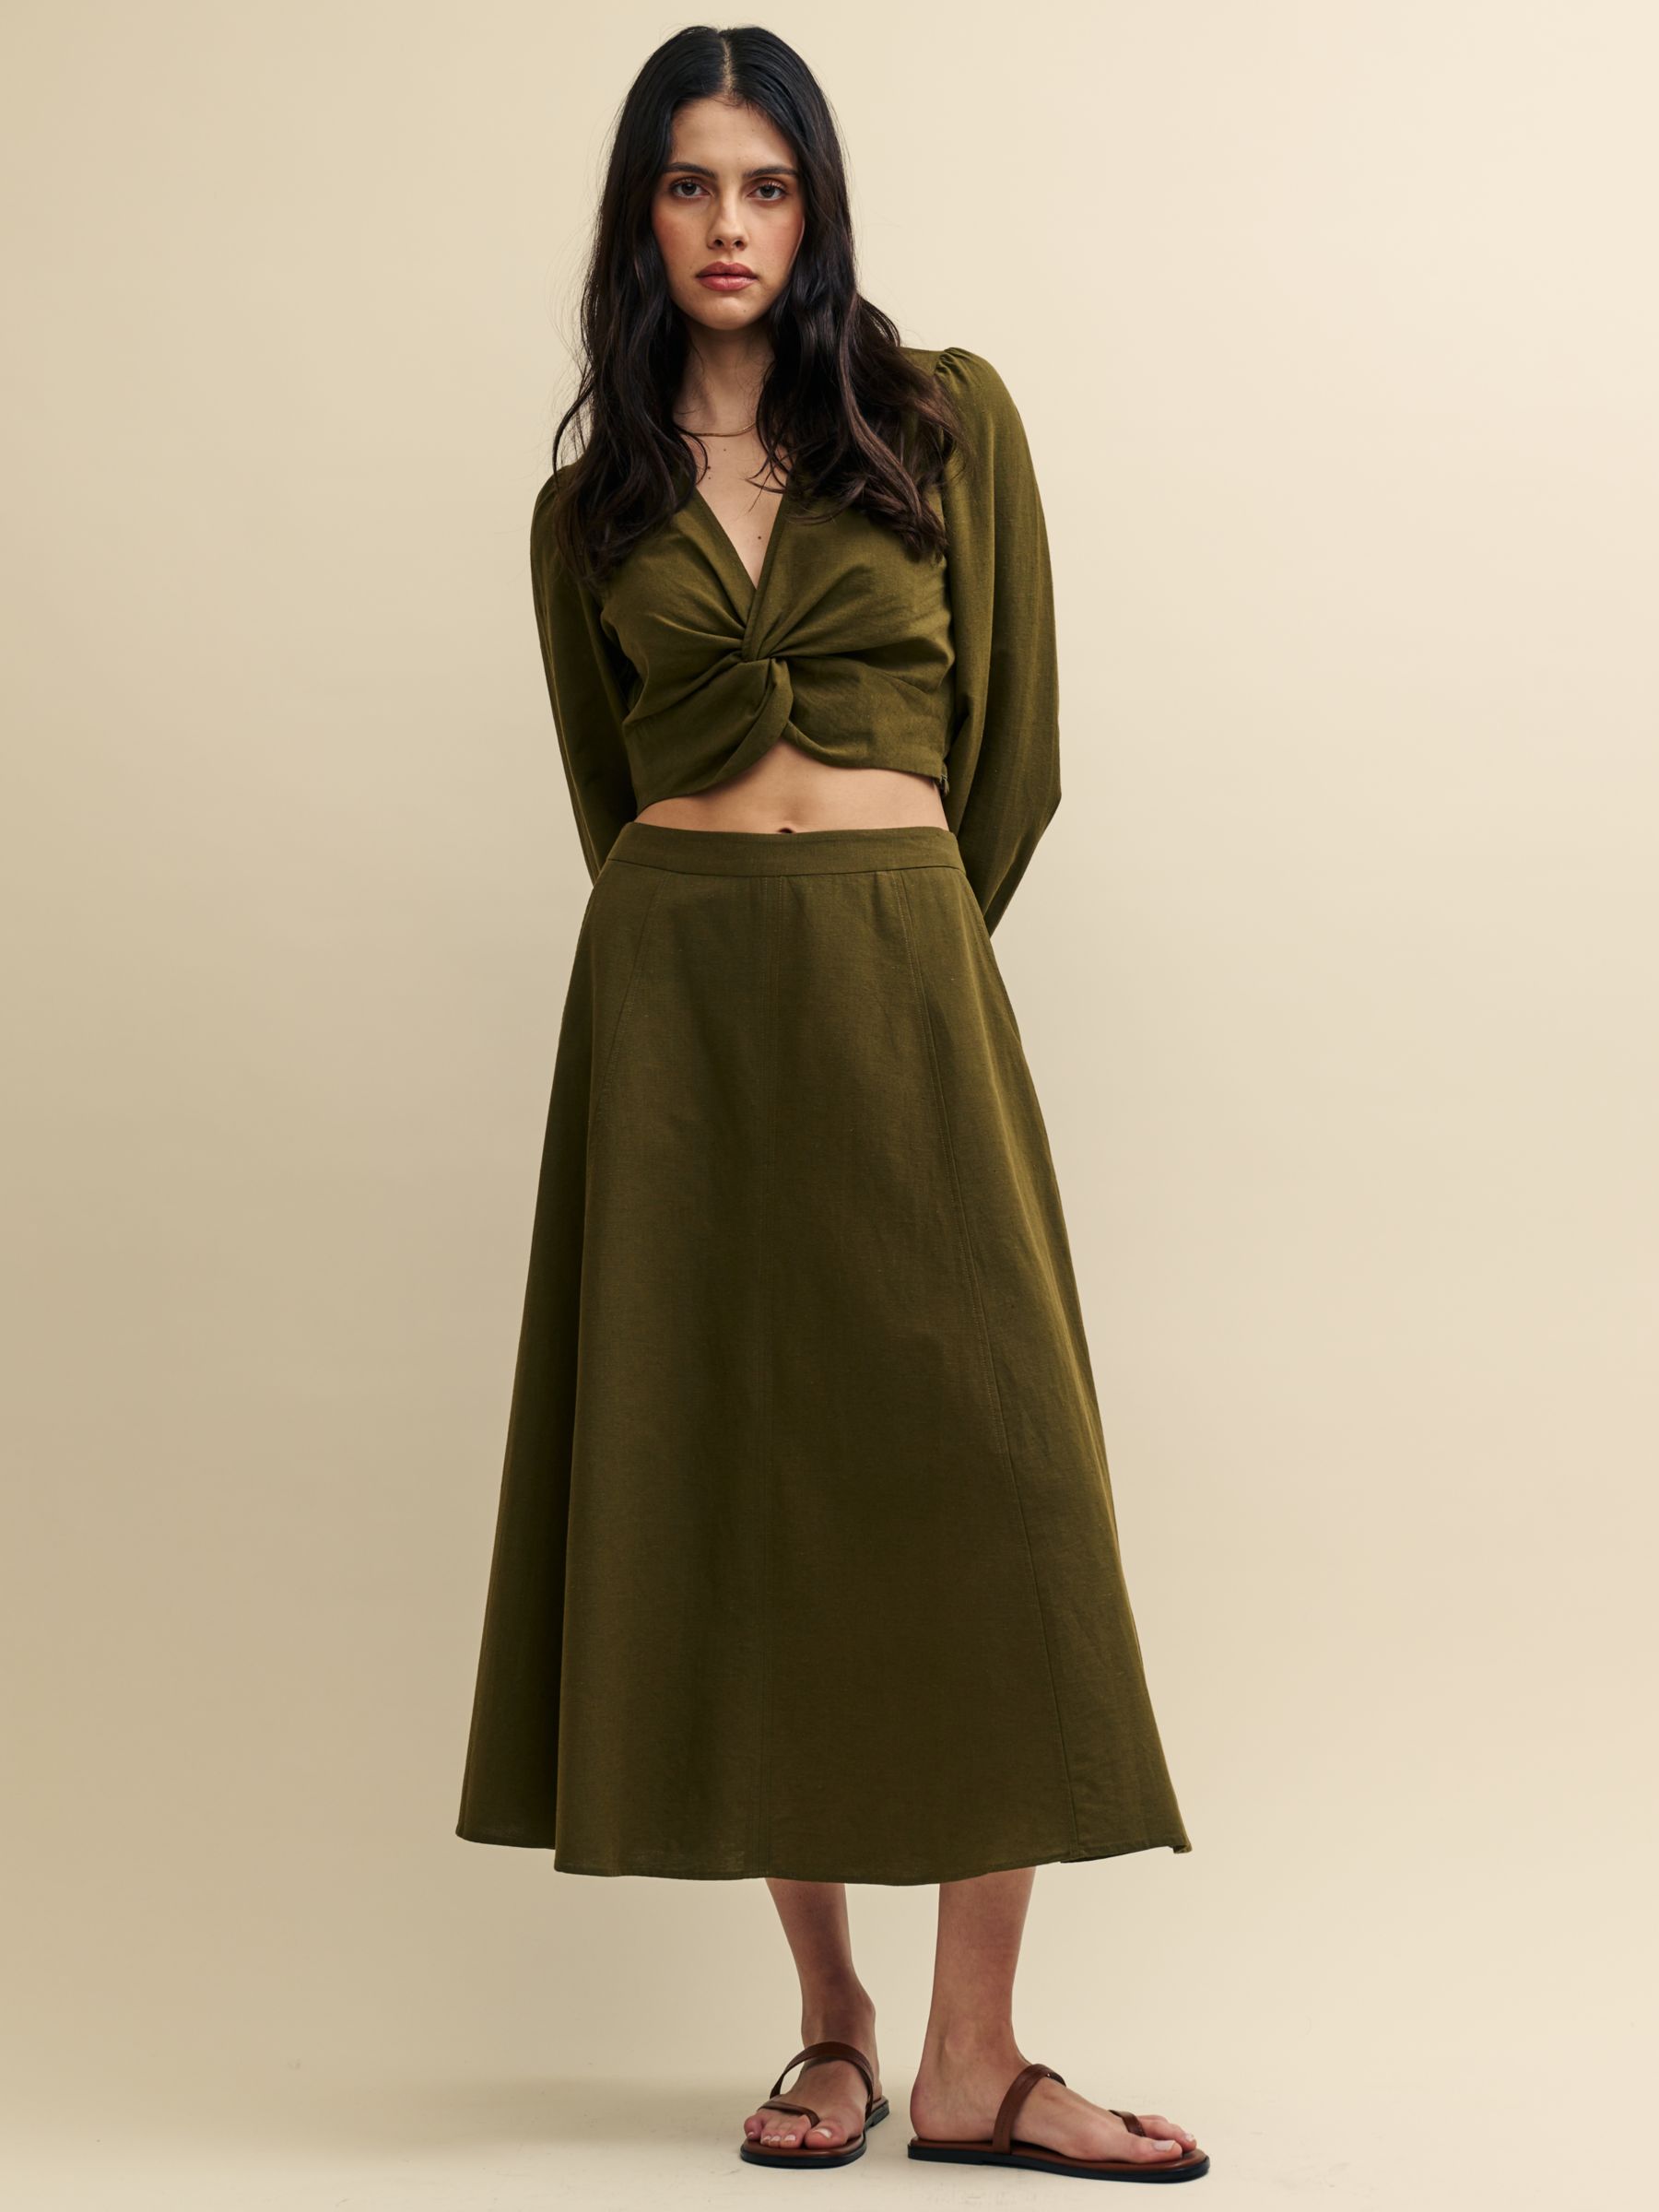 John Lewis & Partners Women's Clothing On Sale Up To 90% Off